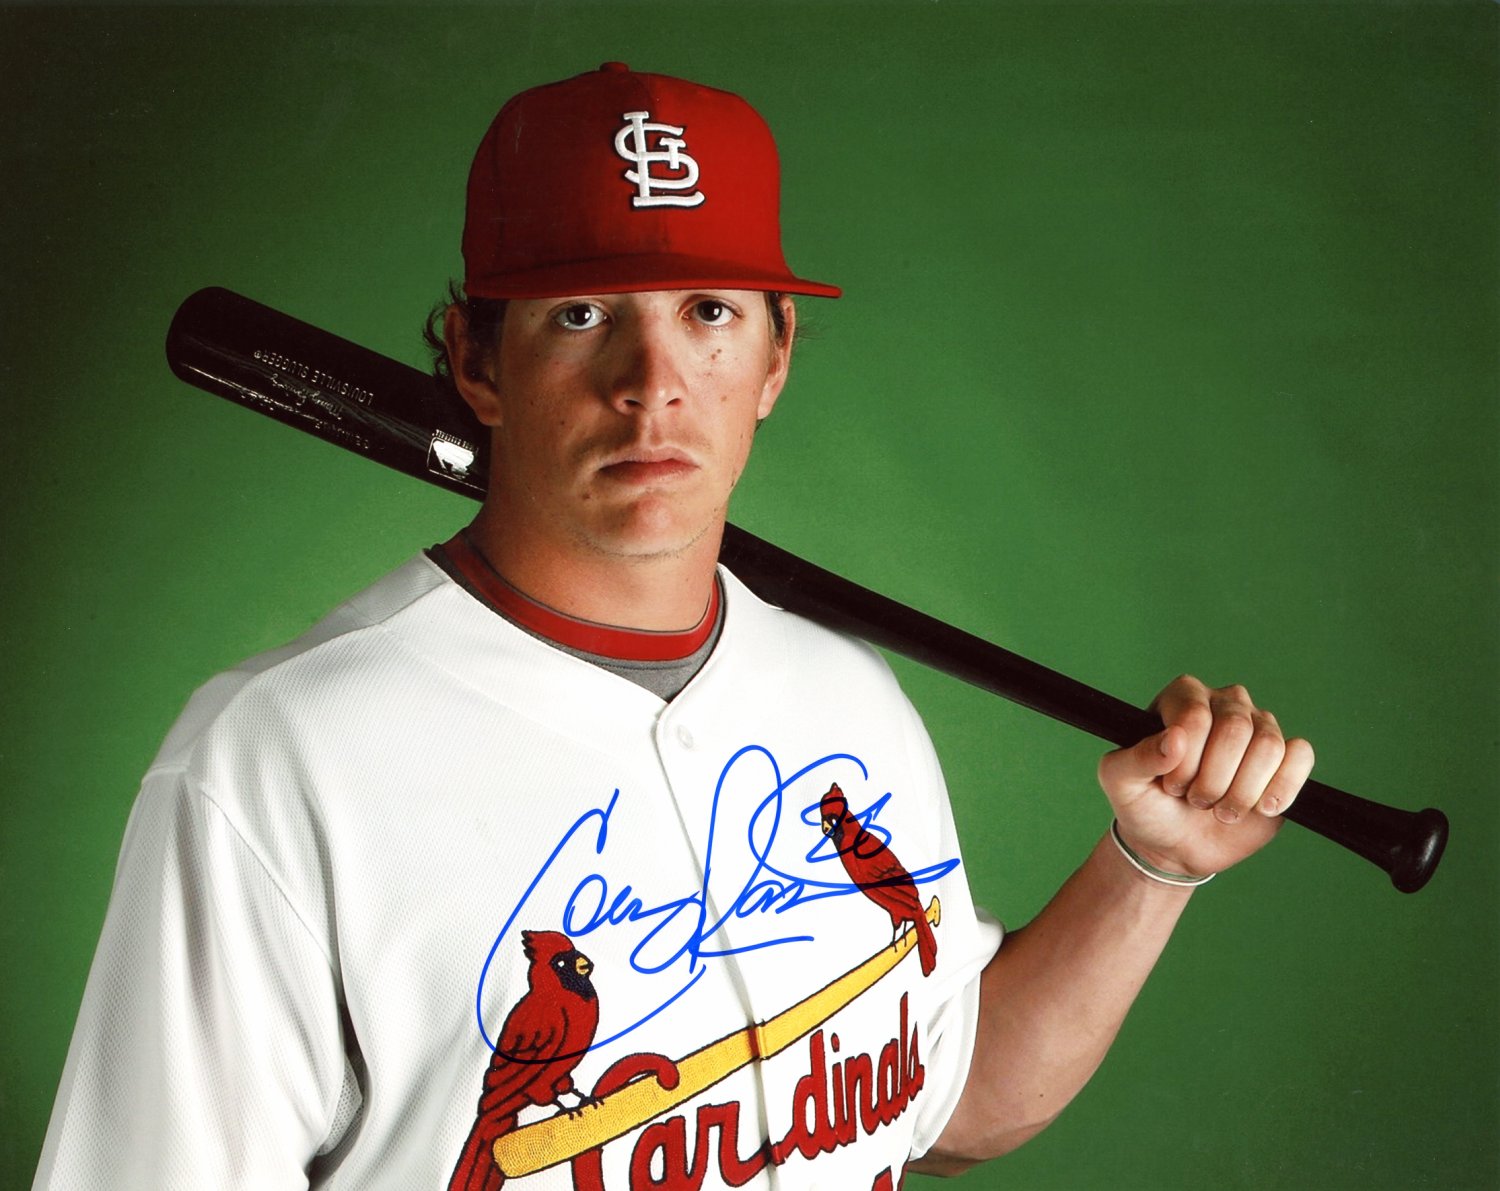 Colby Rasmus St. Louis Cardinals Autographed Signed 8x10 Photo - Certified Authentic